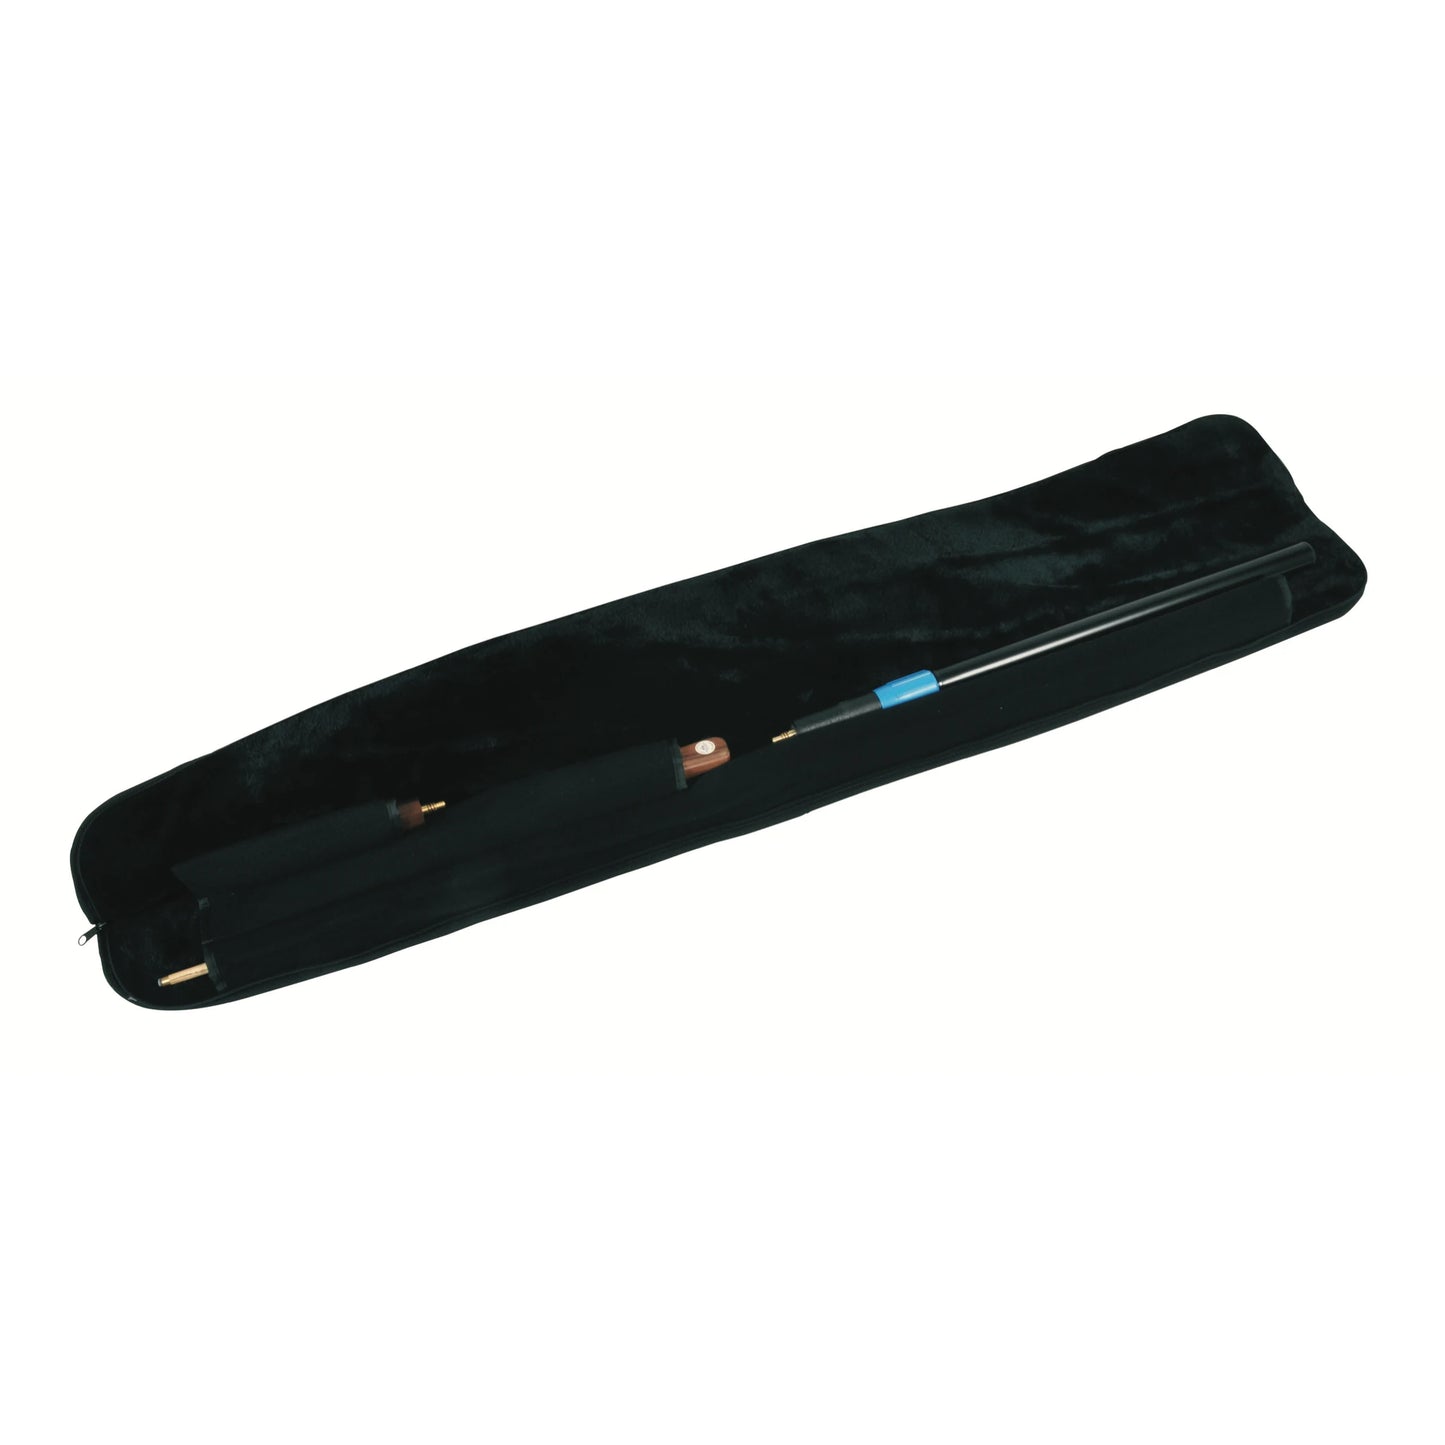 Peradon Full Zip Soft Case for ¾ Jointed Snooker Cues